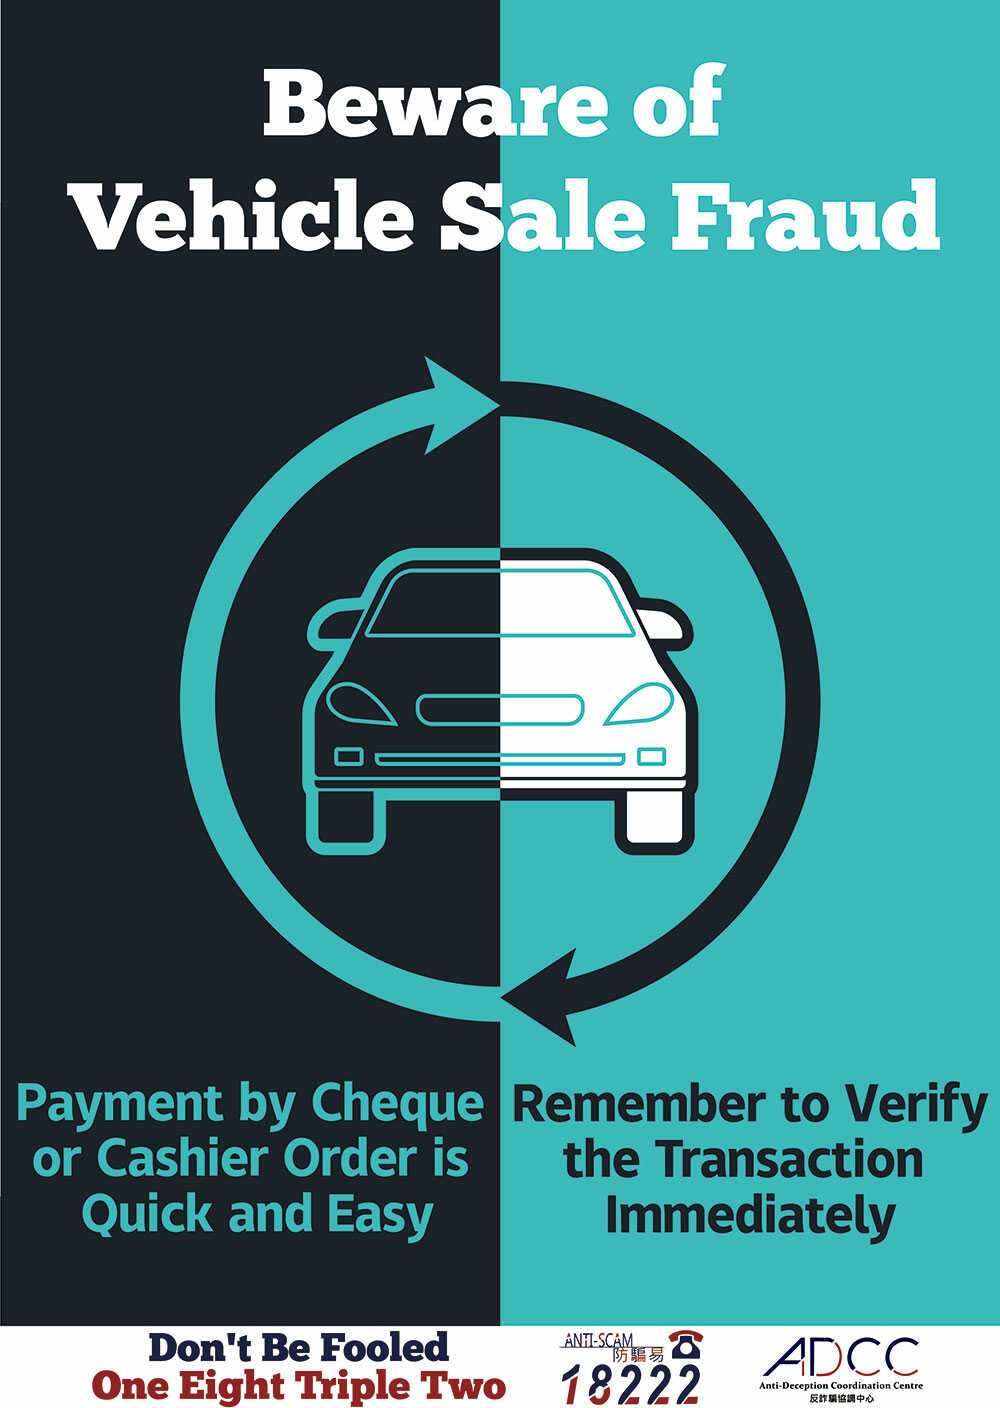 Beware of forged bank cashier orders when selling high-end motor vehicles